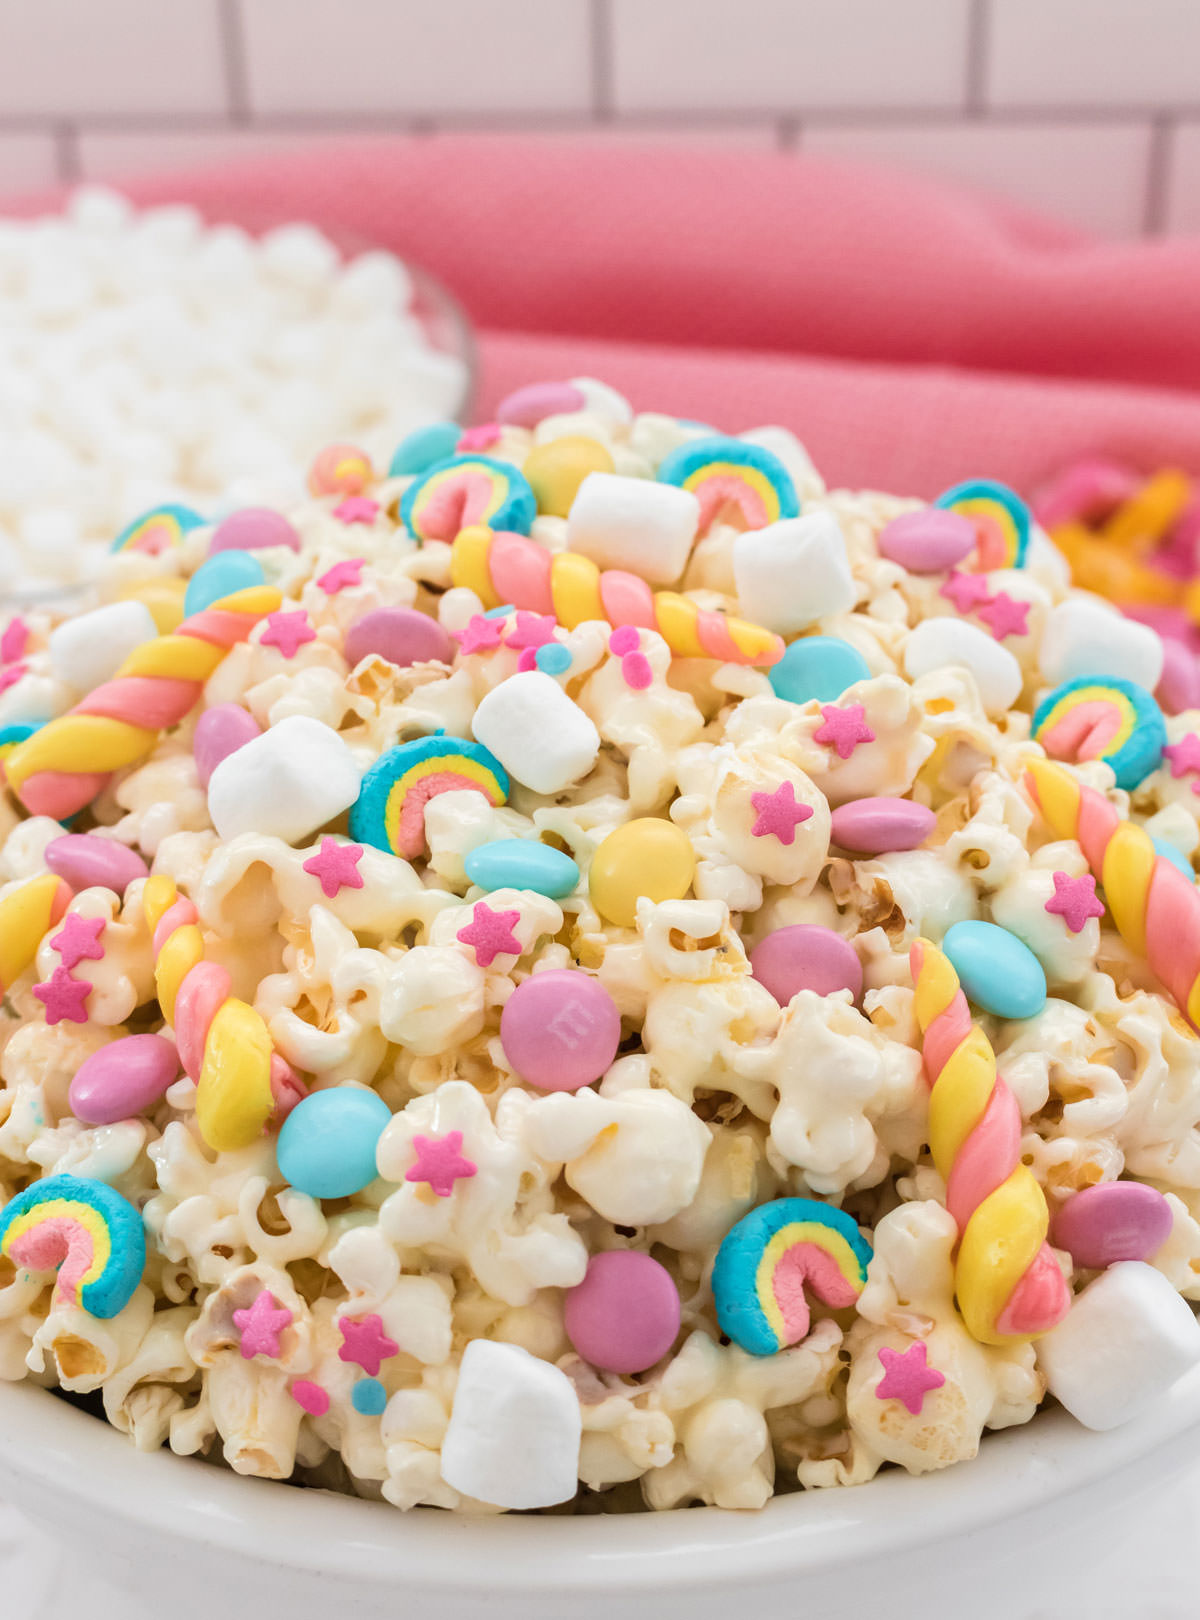 Closeup on a white serving bowl filled with colorful Unicorn Popcorn with a bowl of mini marshmallows in the background and a pink table linen.